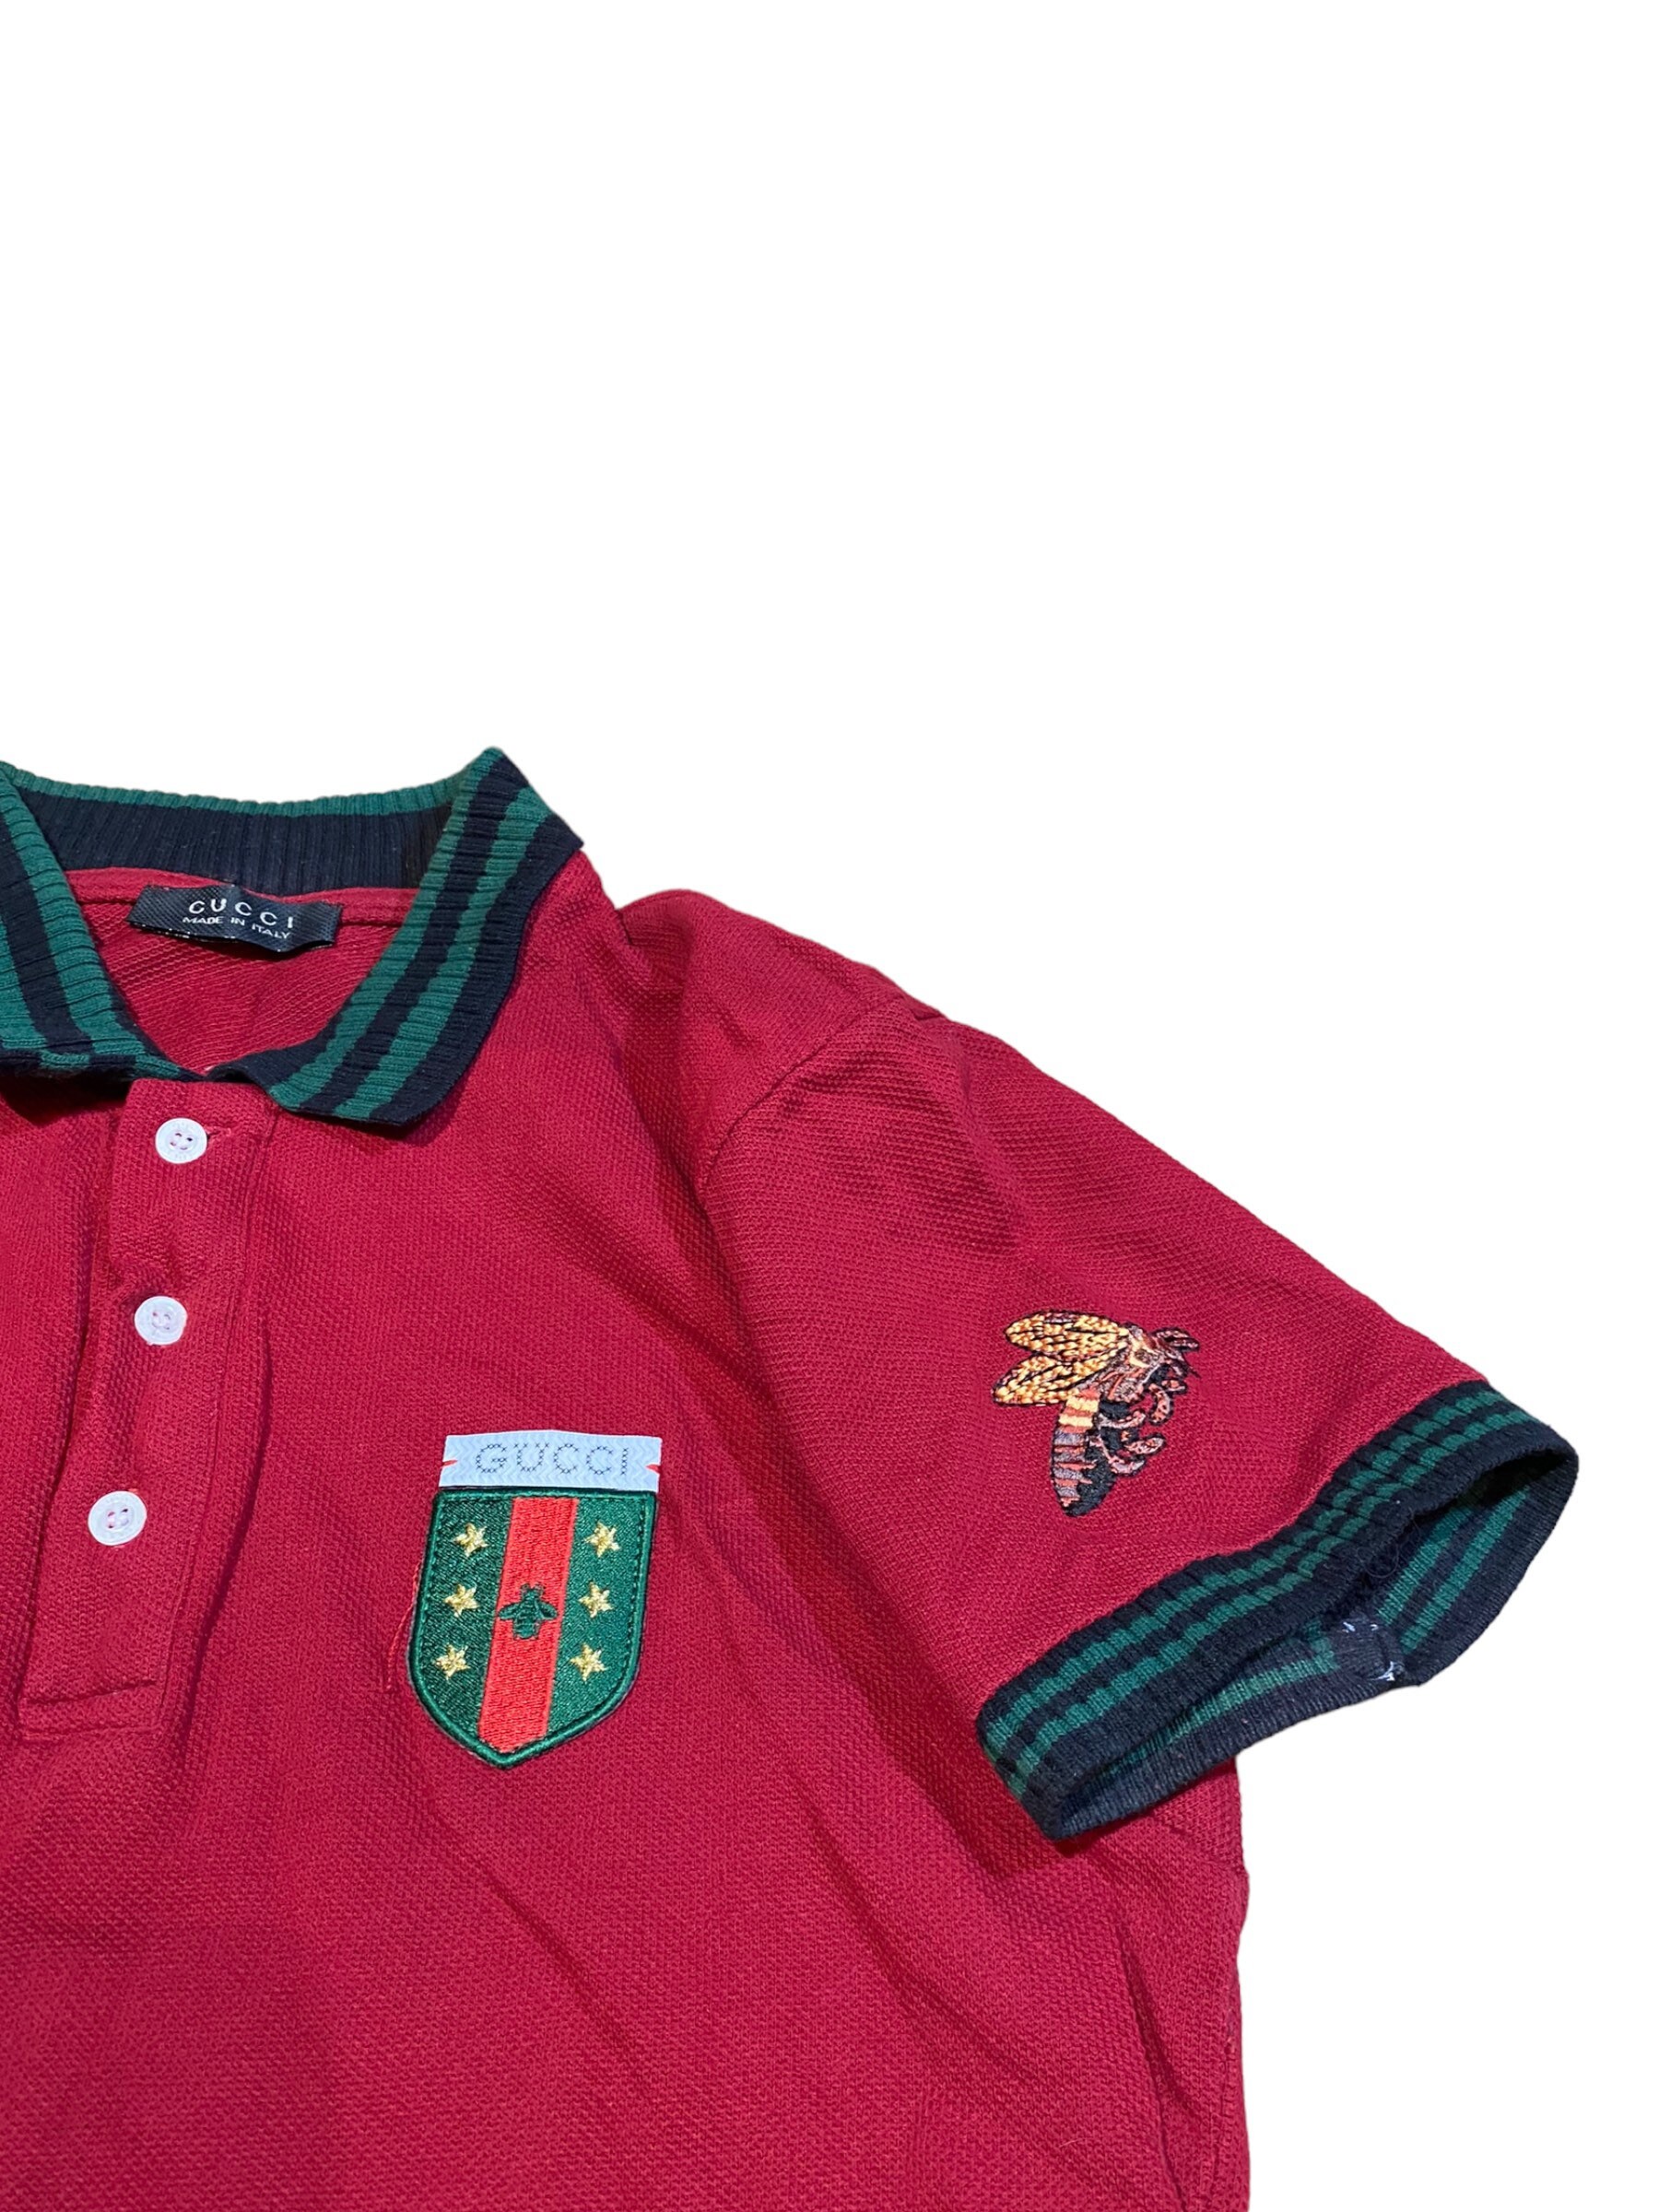 Vintage Gucci Button up Polo T-shirt Luxurious Luxury Wealth 